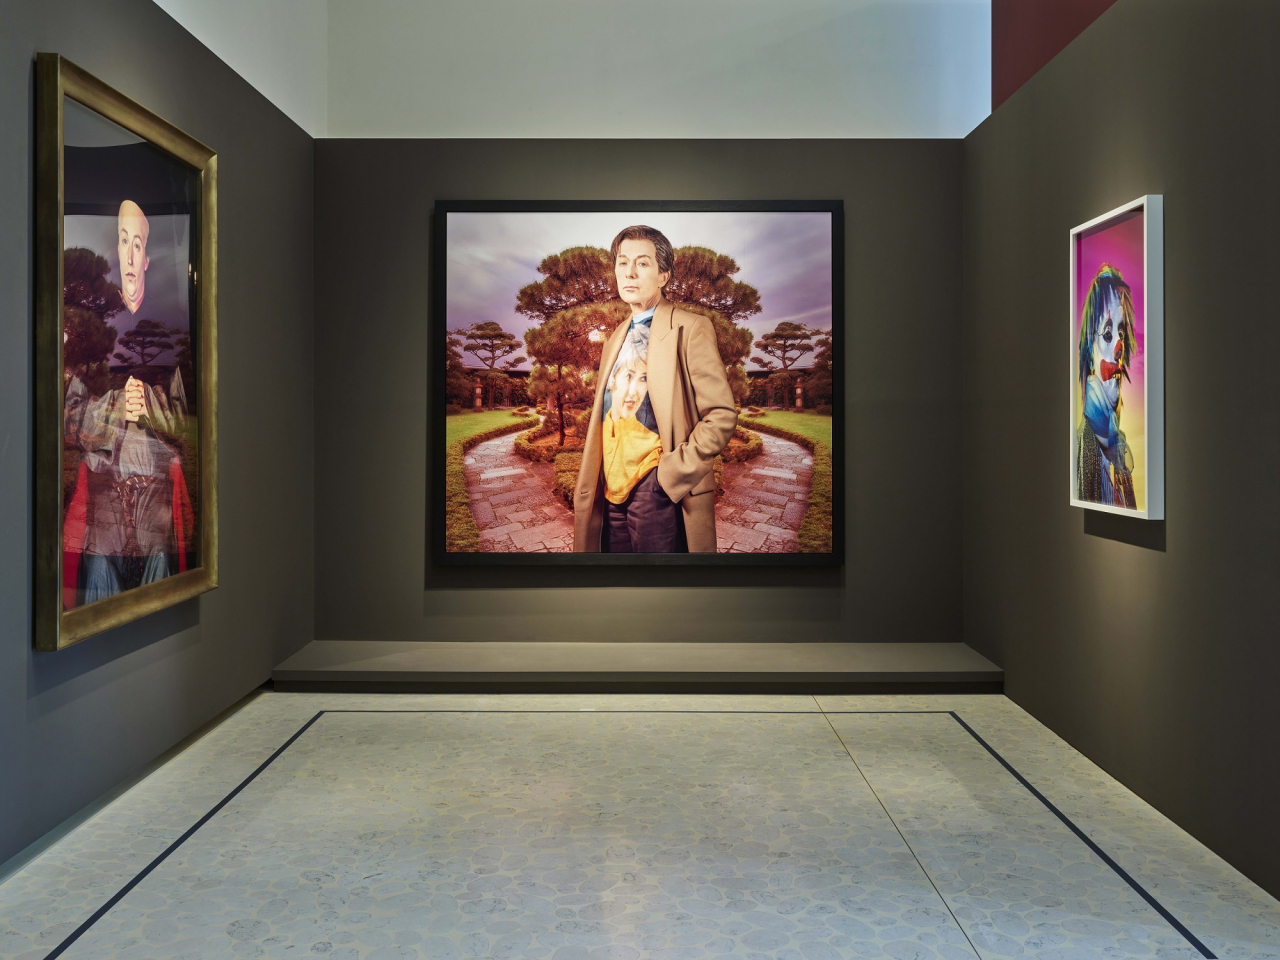 Cache of Cindy Sherman's work from Fondation Louis Vuitton shown